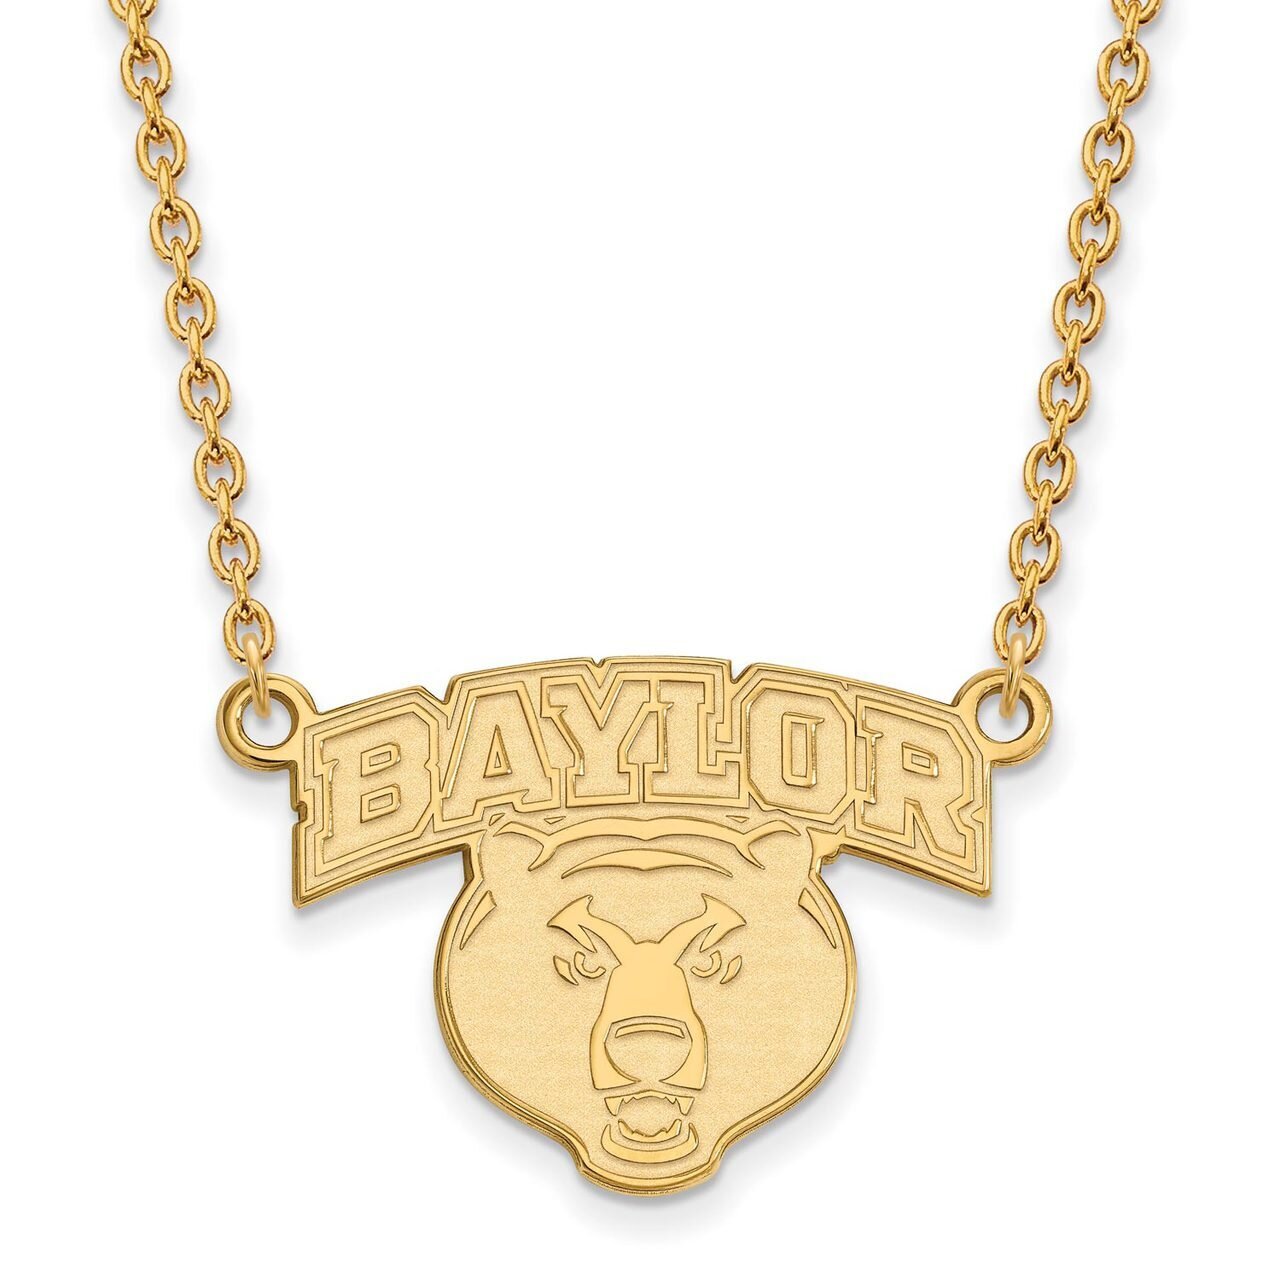 Baylor University Large Pendant with Chain Necklace Gold-plated Silver GP031BU-18